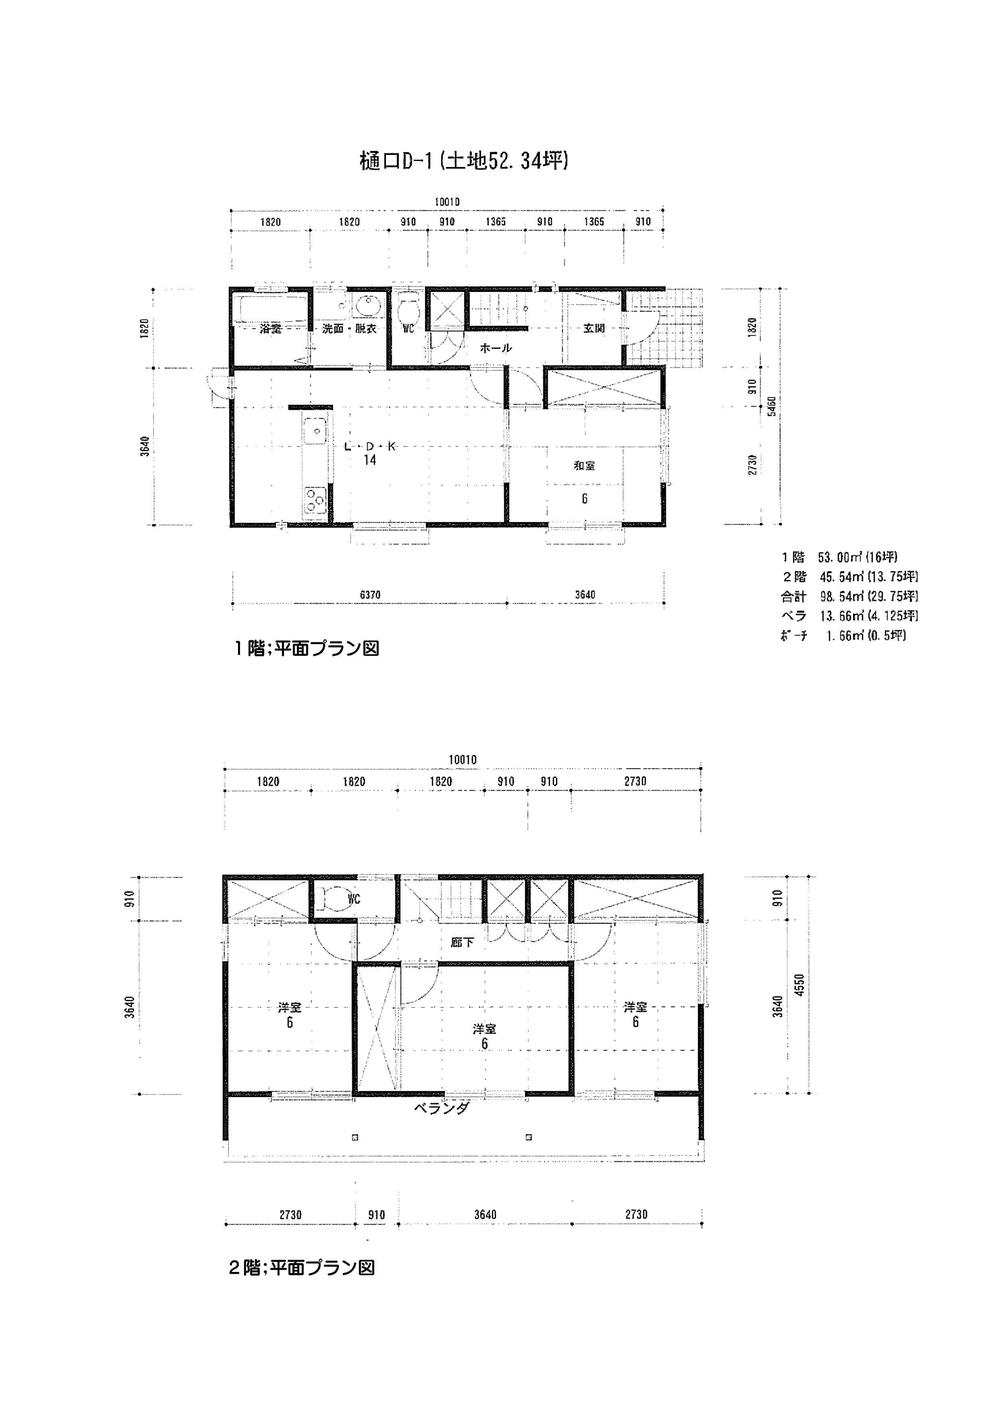 Building plan example (floor plan). View from local